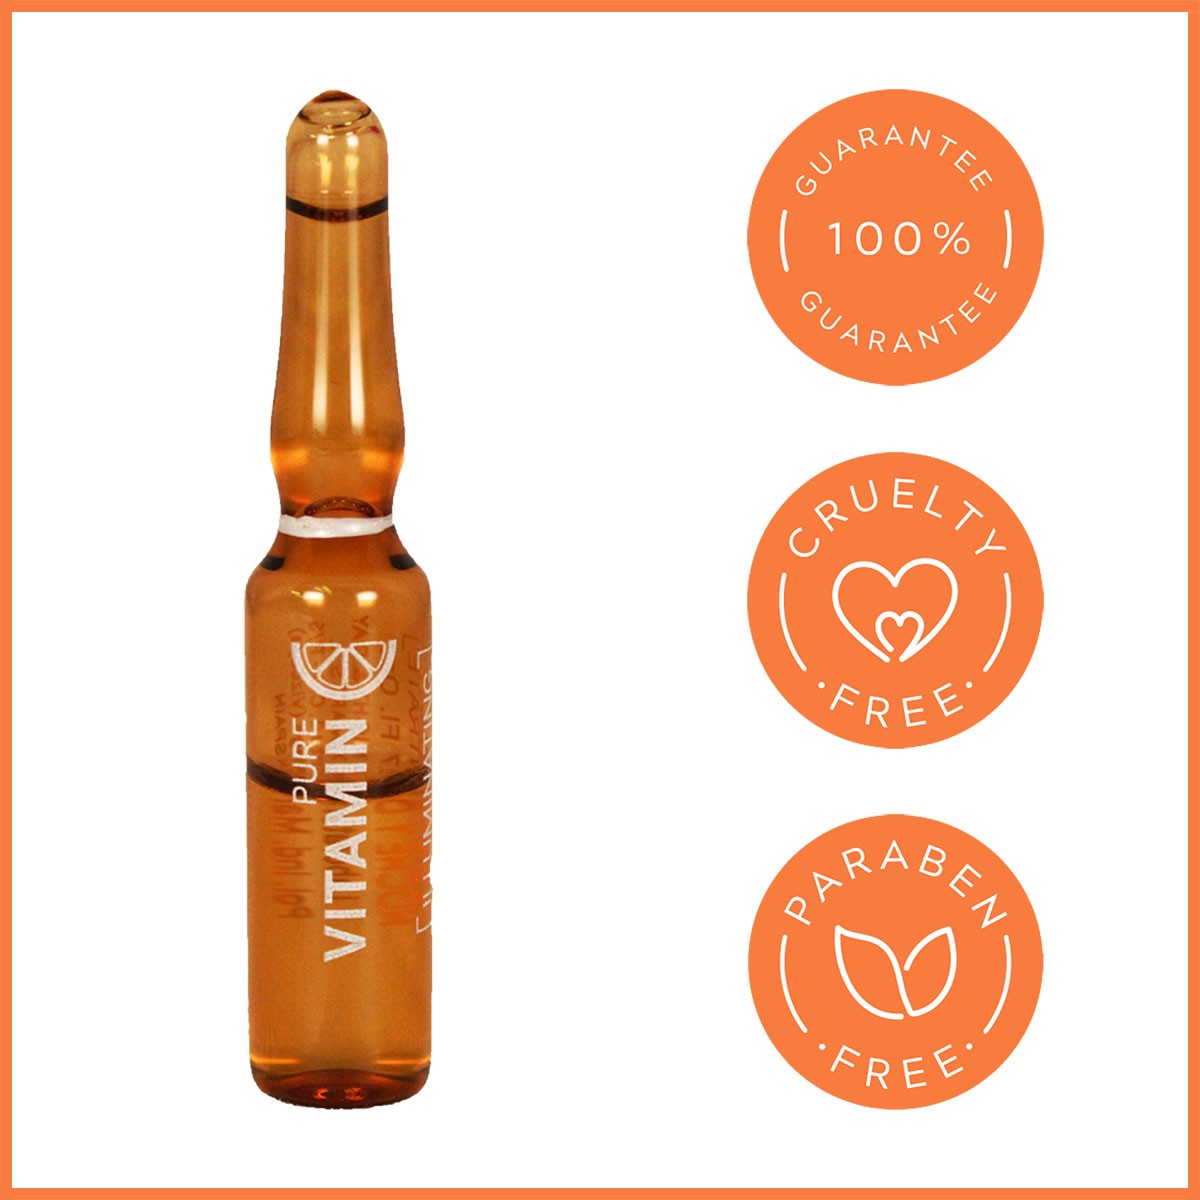 Vitamin C Ampoule with 3 orange seals of approval on the right: 100% guarantee, cruelty-free, and paraben-free.